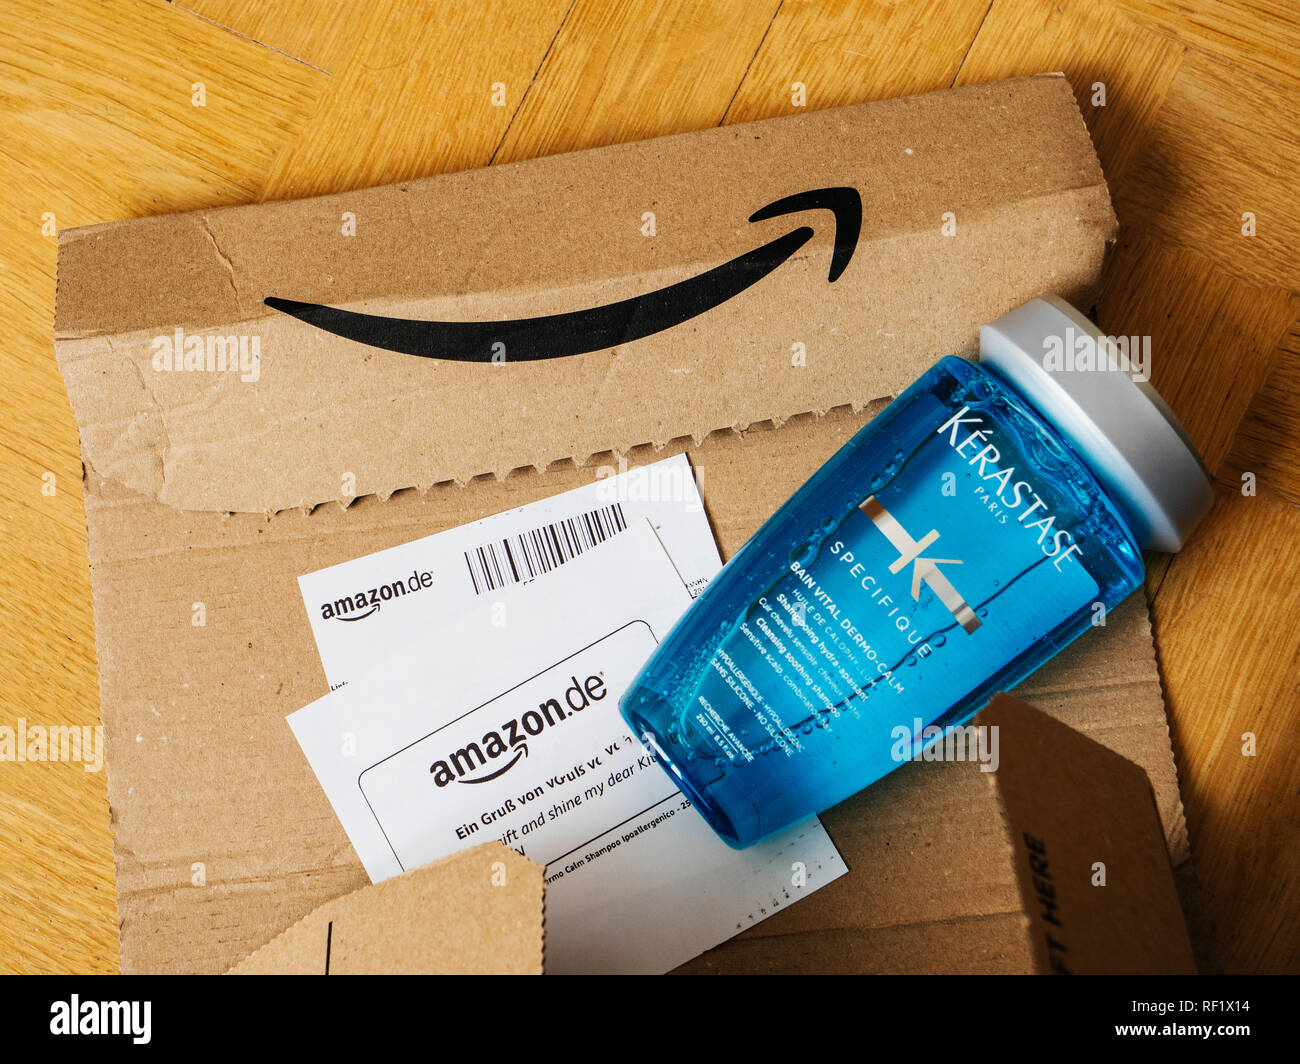 PARIS, FRANCE - APR 14, 2018: Kerastase Paris shampoo bottle delivered by  Amazon prime - view from above on the cardboard box Stock Photo - Alamy